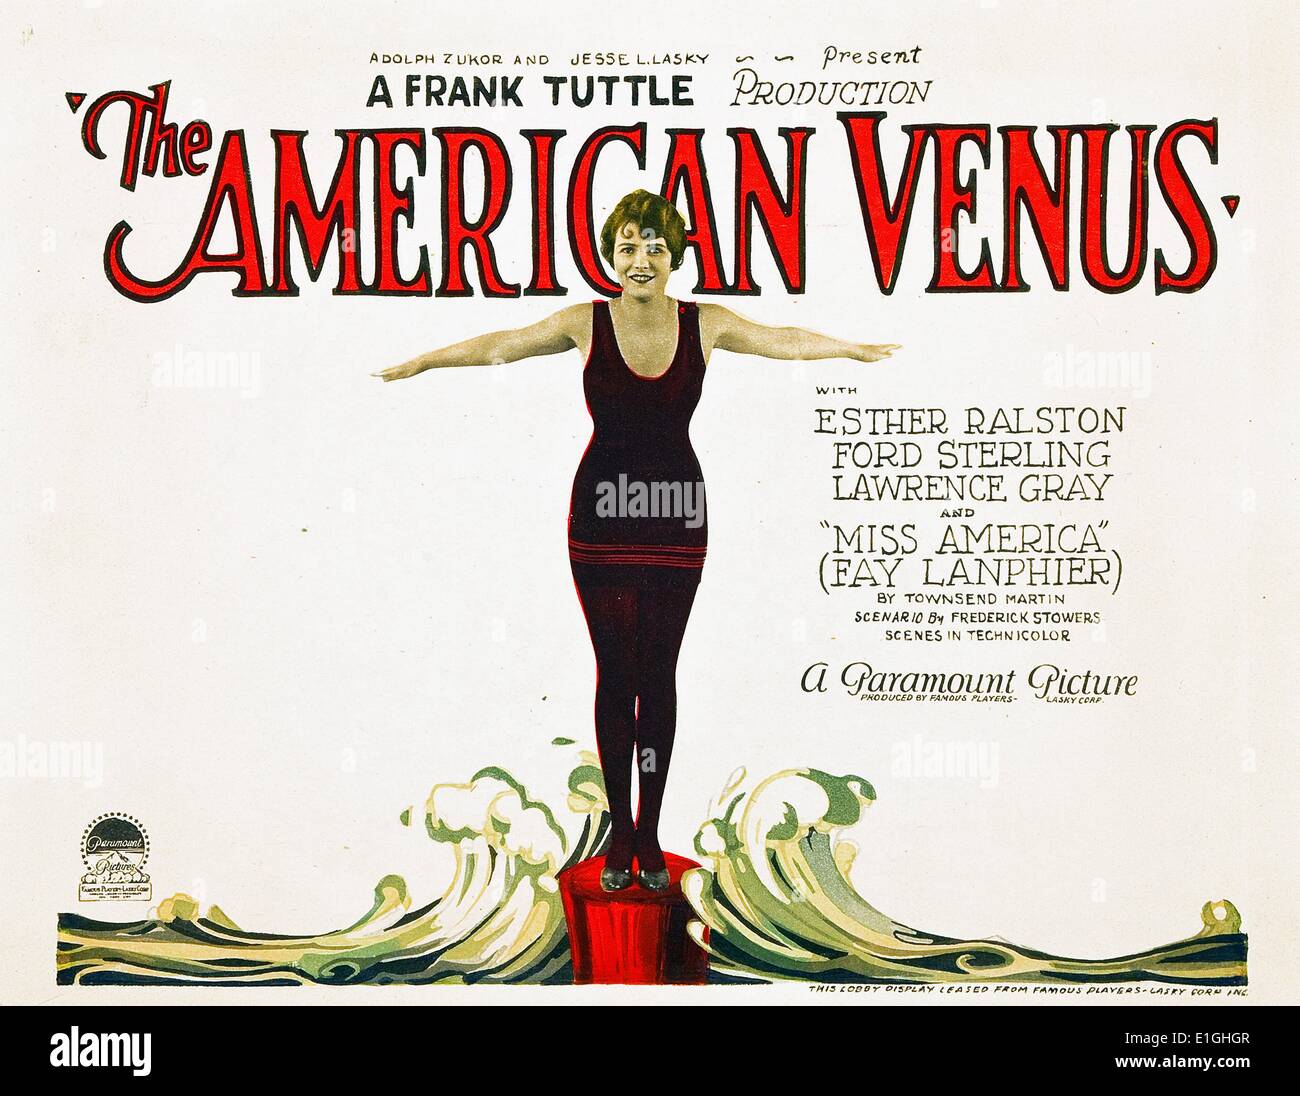 The American Venus was a 1926 American silent comedy film directed by Frank Tuttle, and starring Esther Ralston, Ford Sterling, Edna May Oliver, Lawrence Gray, Fay Lanphier, Louise Brooks, Kenneth MacKenna, and Douglas Fairbanks Jr., and released by Paramount Pictures. Brooks appears, in her first credited role as 'Miss Bayport'. Lanphier was crowned Miss America in 1925.[1] Stock Photo